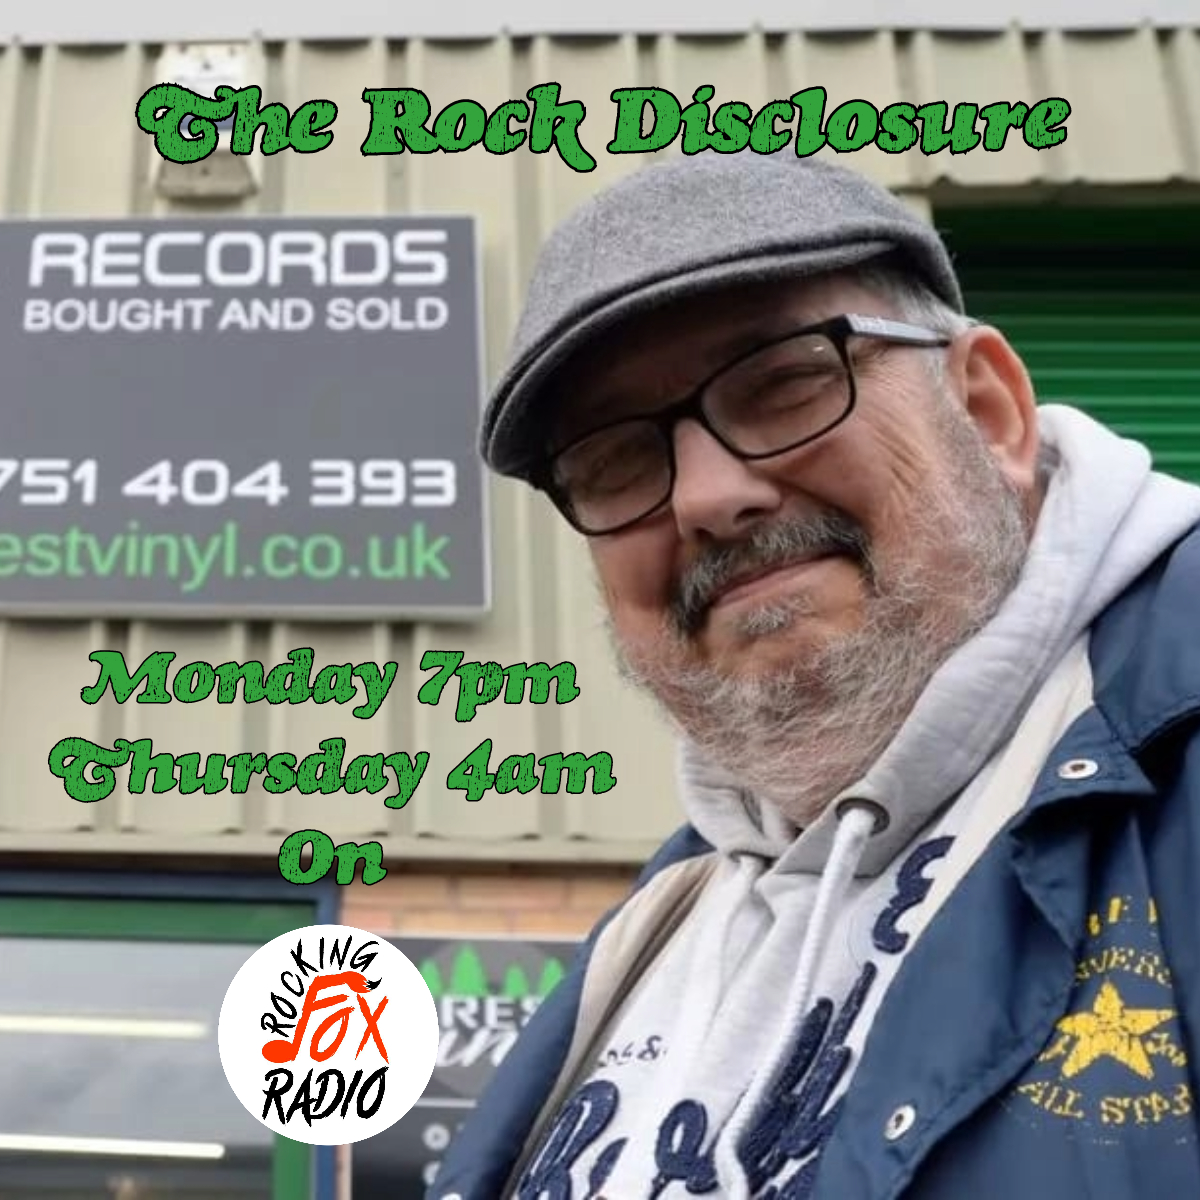 On 5th November we lost one of our original presenters, Steve Helsdown. As a tribute to our much missed friend and colleague we will be re-running his ' Rock Disclosure' on Mondays at 7pm with a repeat for you night owls, at 4am on Thursdays.